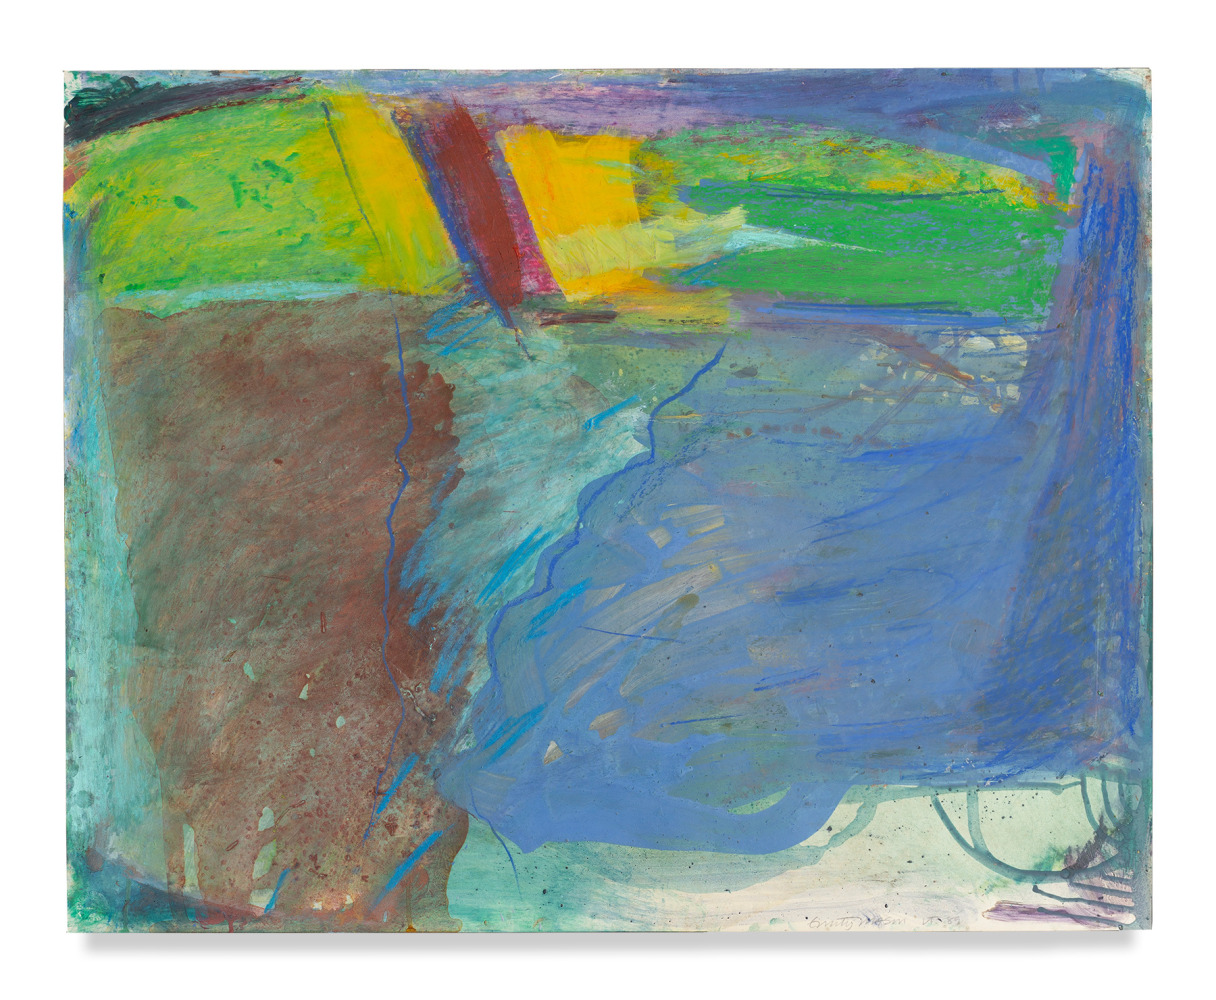 Emily Mason

And Miles To Go, 1989

Oil on paper

23h x 29w in

EM014